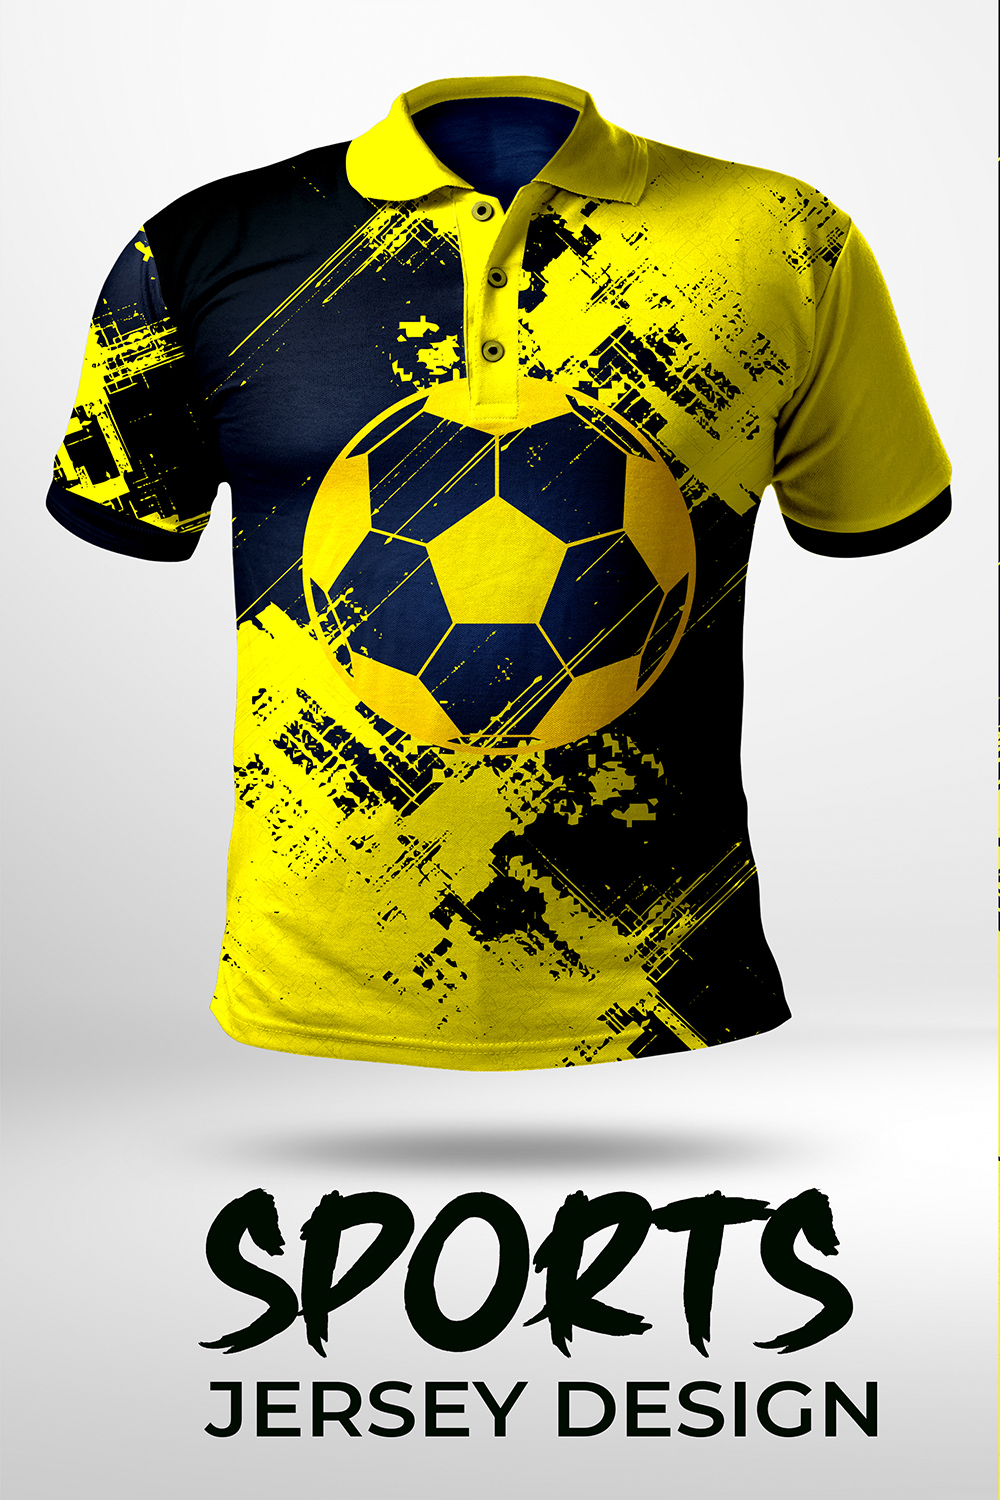 Jersey designs, themes, templates and downloadable graphic